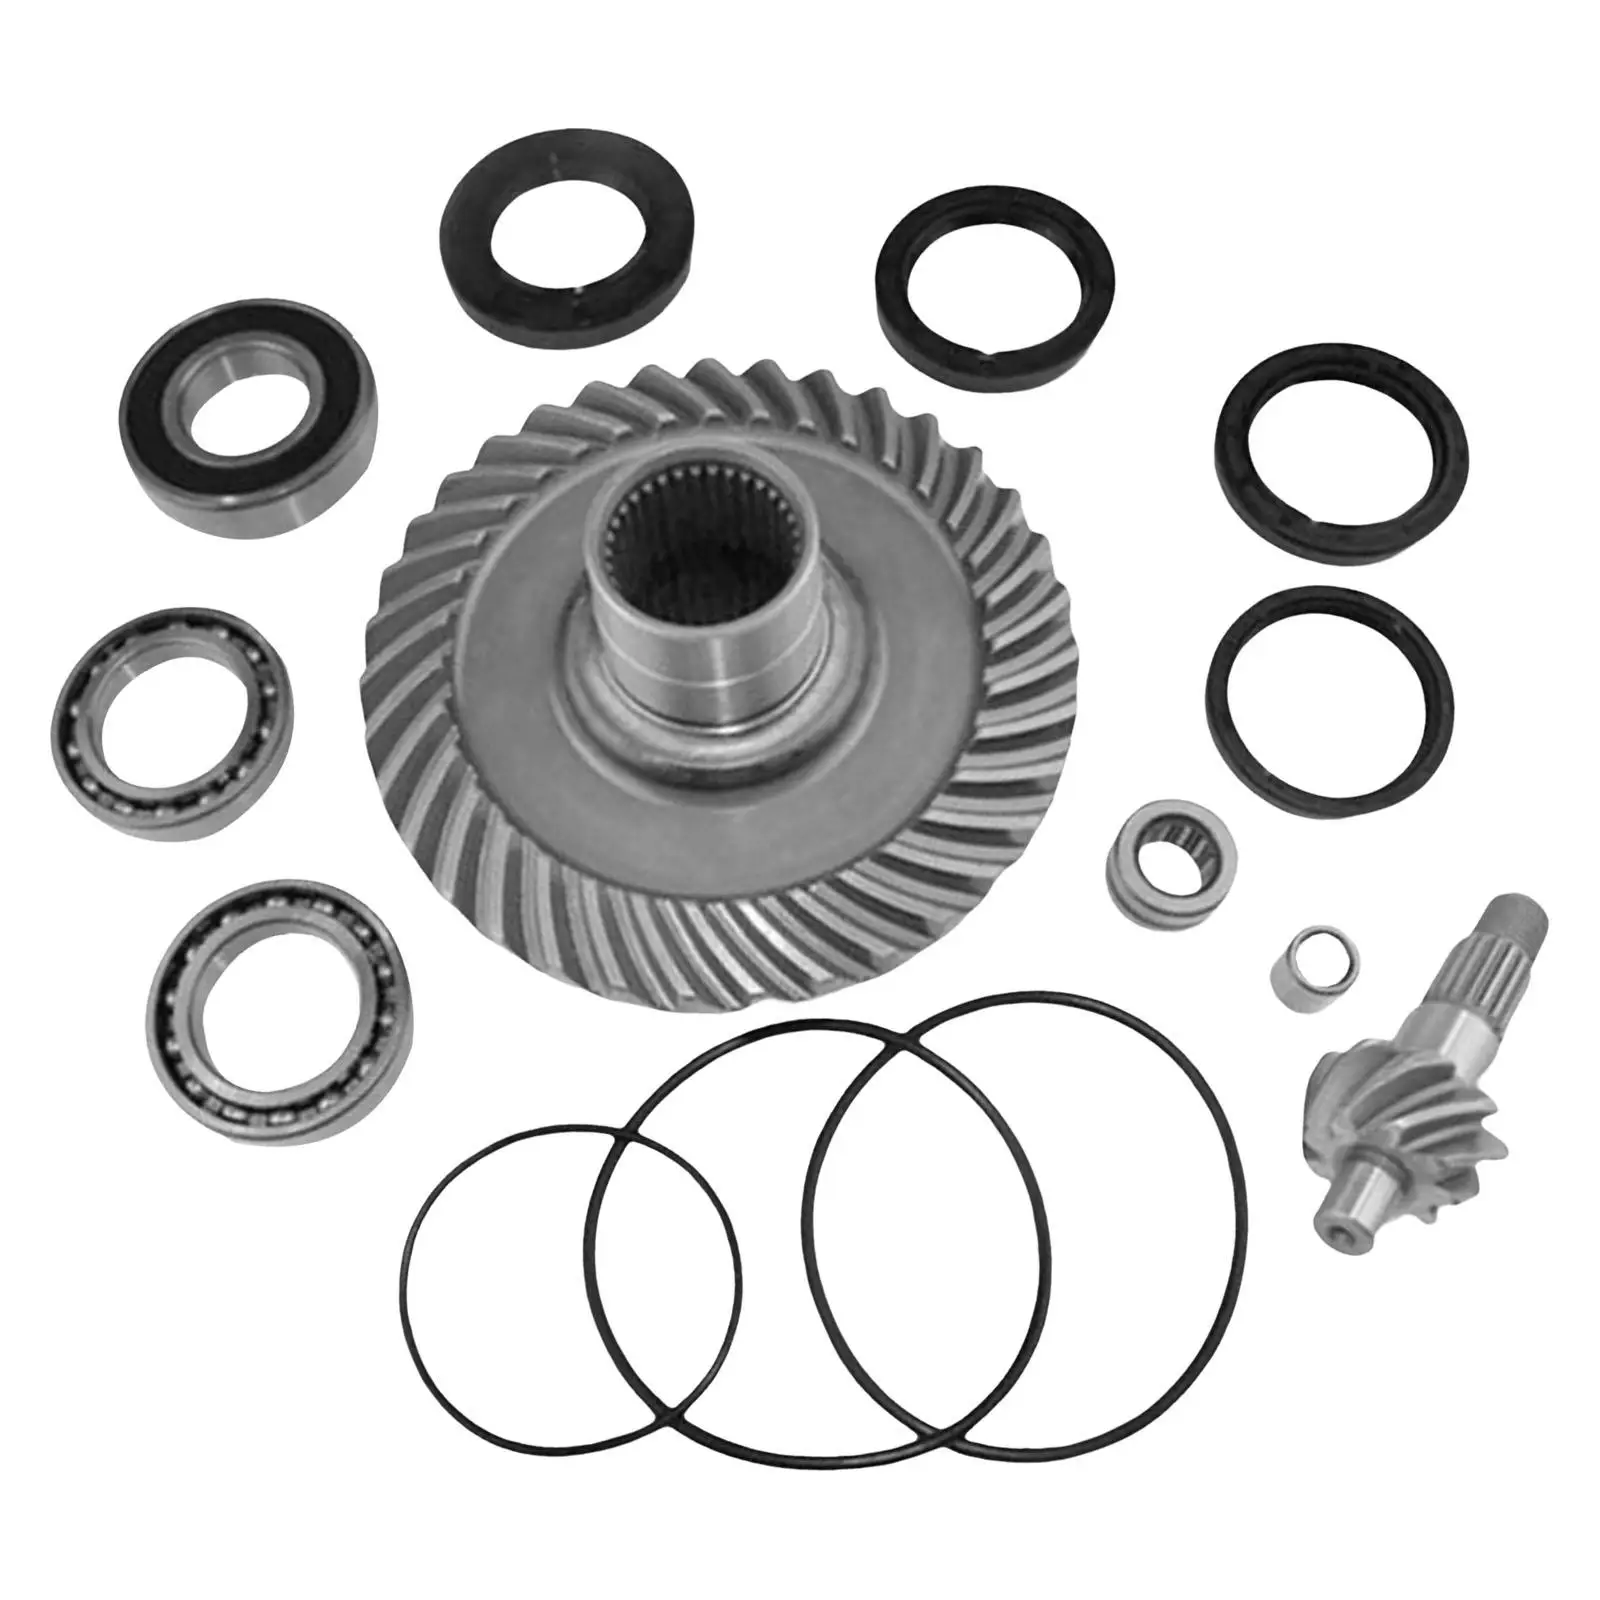 

Rear Differential Ring Gear Kit 127447 Replace Fit for Honda TRX300 300 Fourtrax 4x4 1988-2000